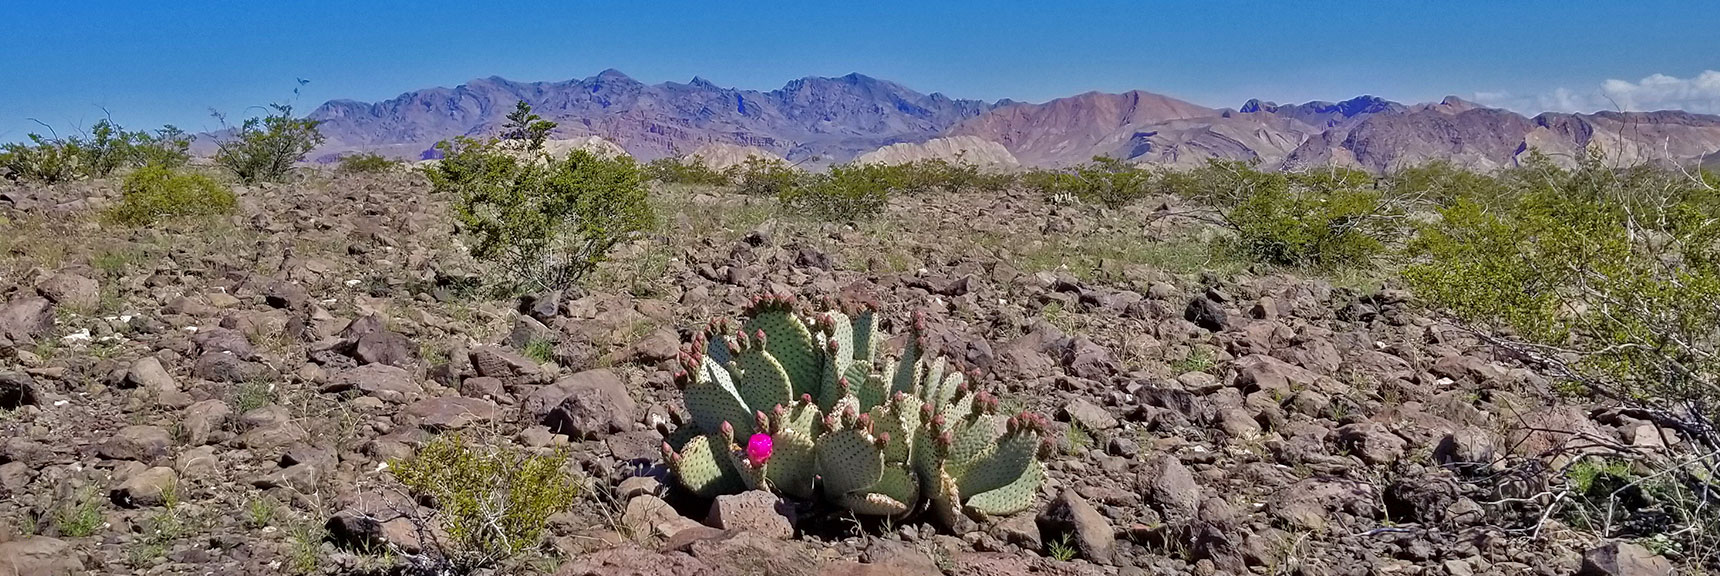 First Beavertail Cactus Bloom on Black Mesa in Lake Mead National Recreation Area, Nevada